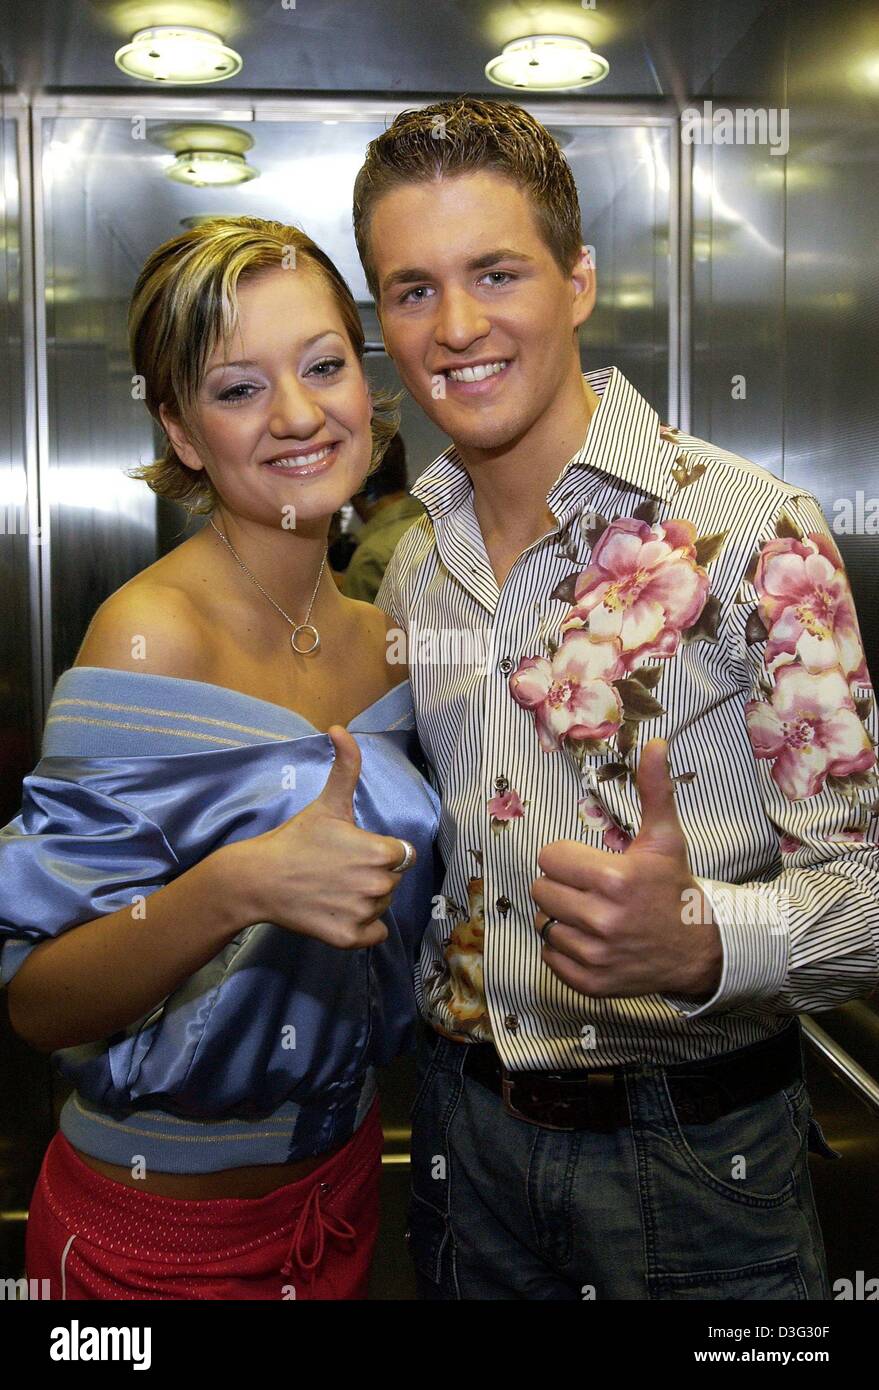 (dpa) - Juliette and Alexander, the two finalists of the TV casting competition 'Deutschland sucht den Superstar' (Germany looks for the superstar), the German version of 'American Idol', pose in Cologne, Germany, 7 March 2003. The final of the casting show will air on 8 March 2003. Stock Photo